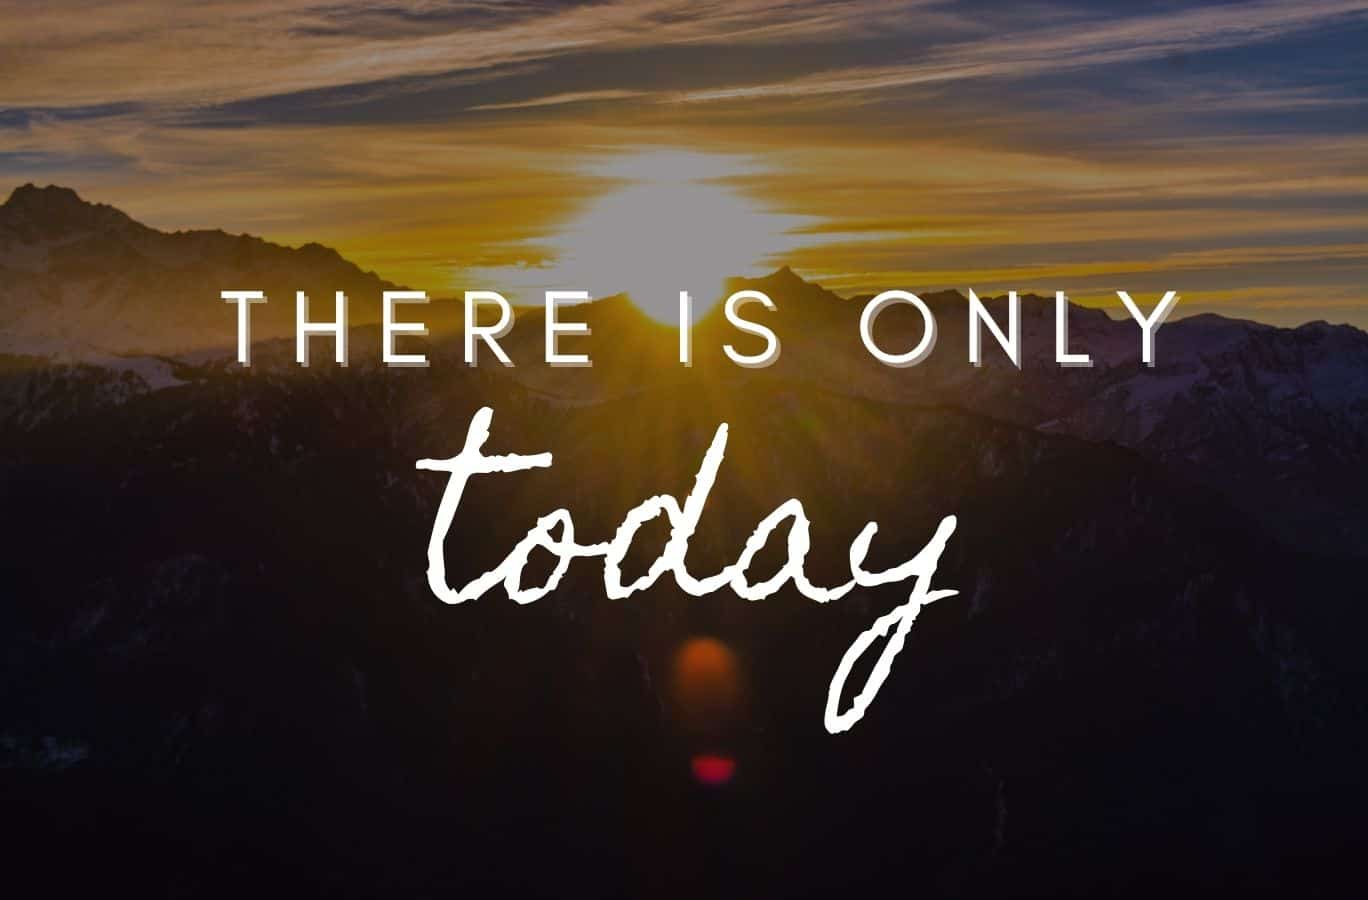 There is only today